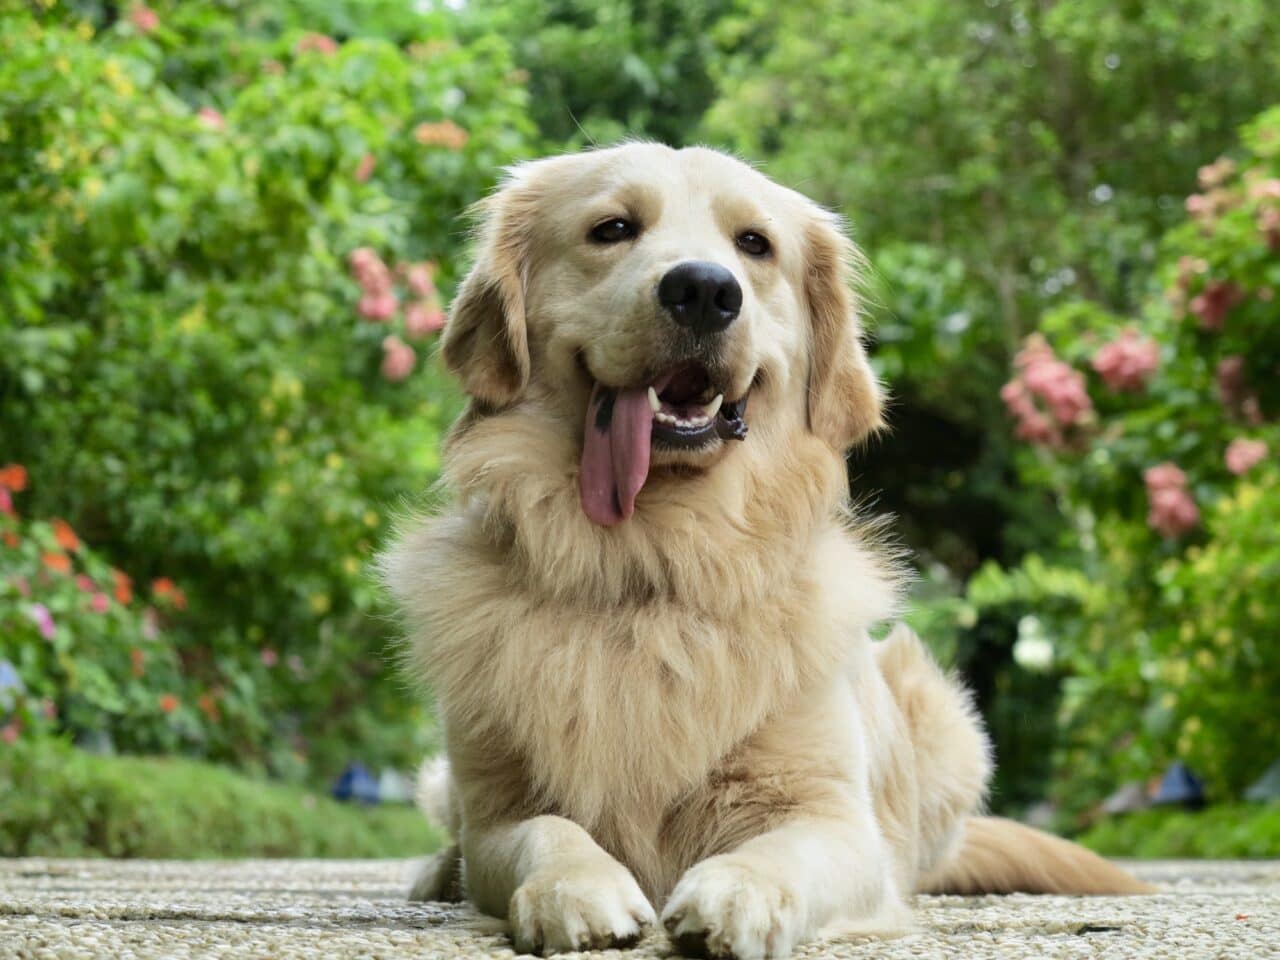 Why is my Golden Retriever panting?